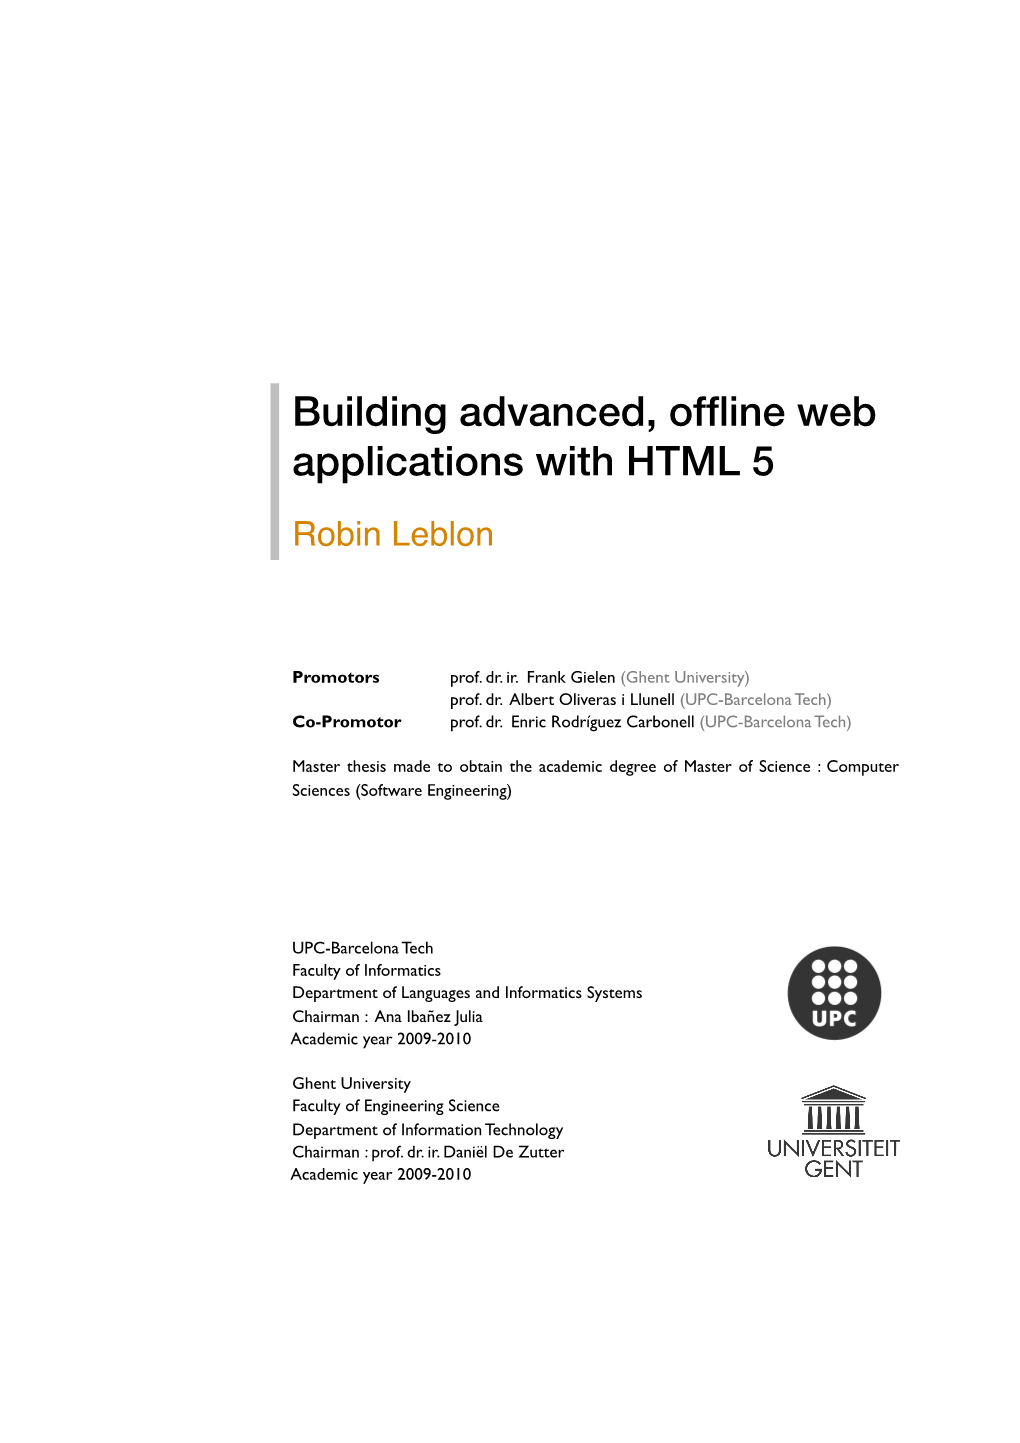 Building Advanced, Offline Web Applications with HTML 5